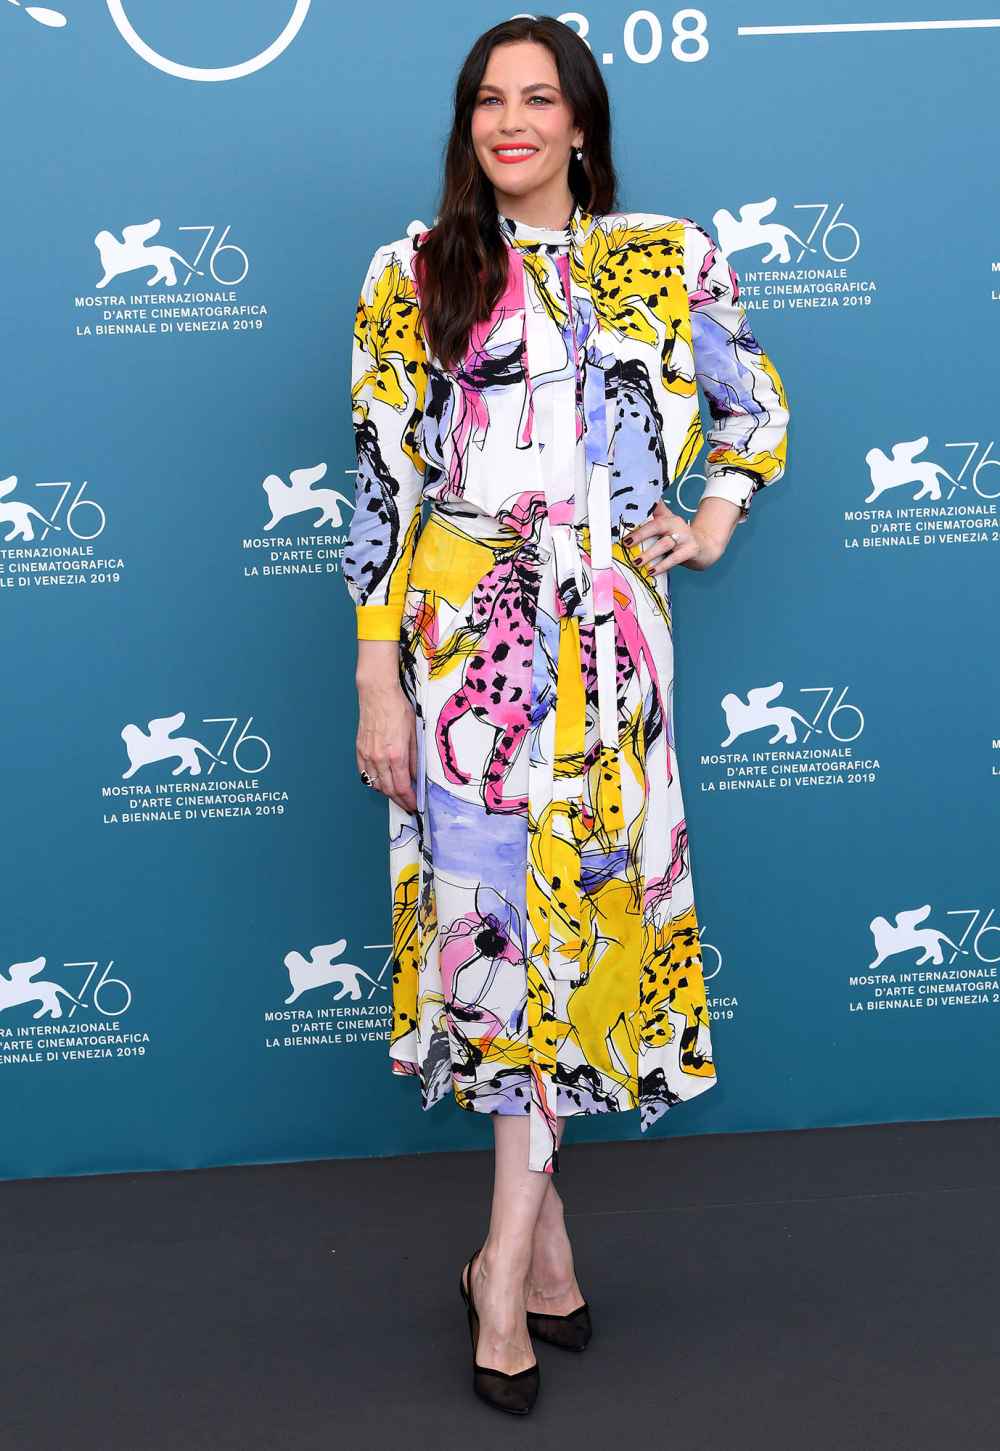 Liv Tyler Wearing Stella McCartney Colorful Dress No Desire to Get Married